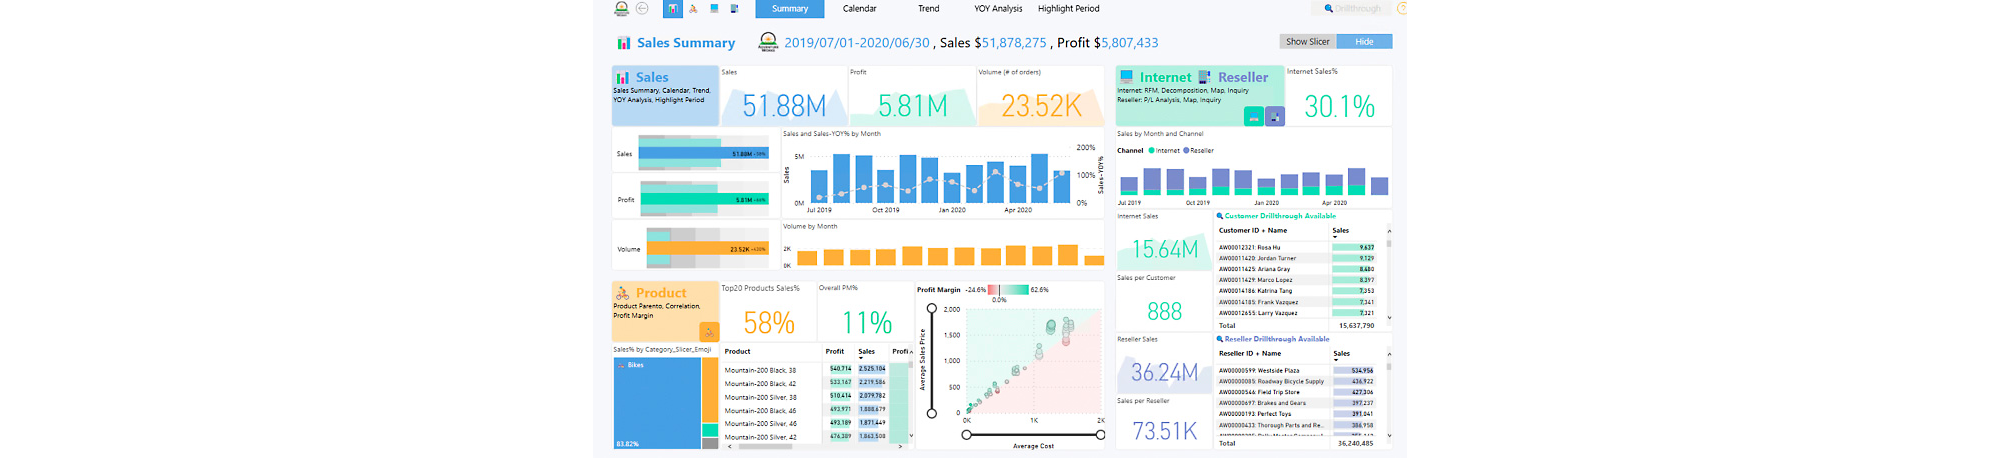 Sales Summary Dashboard Picture